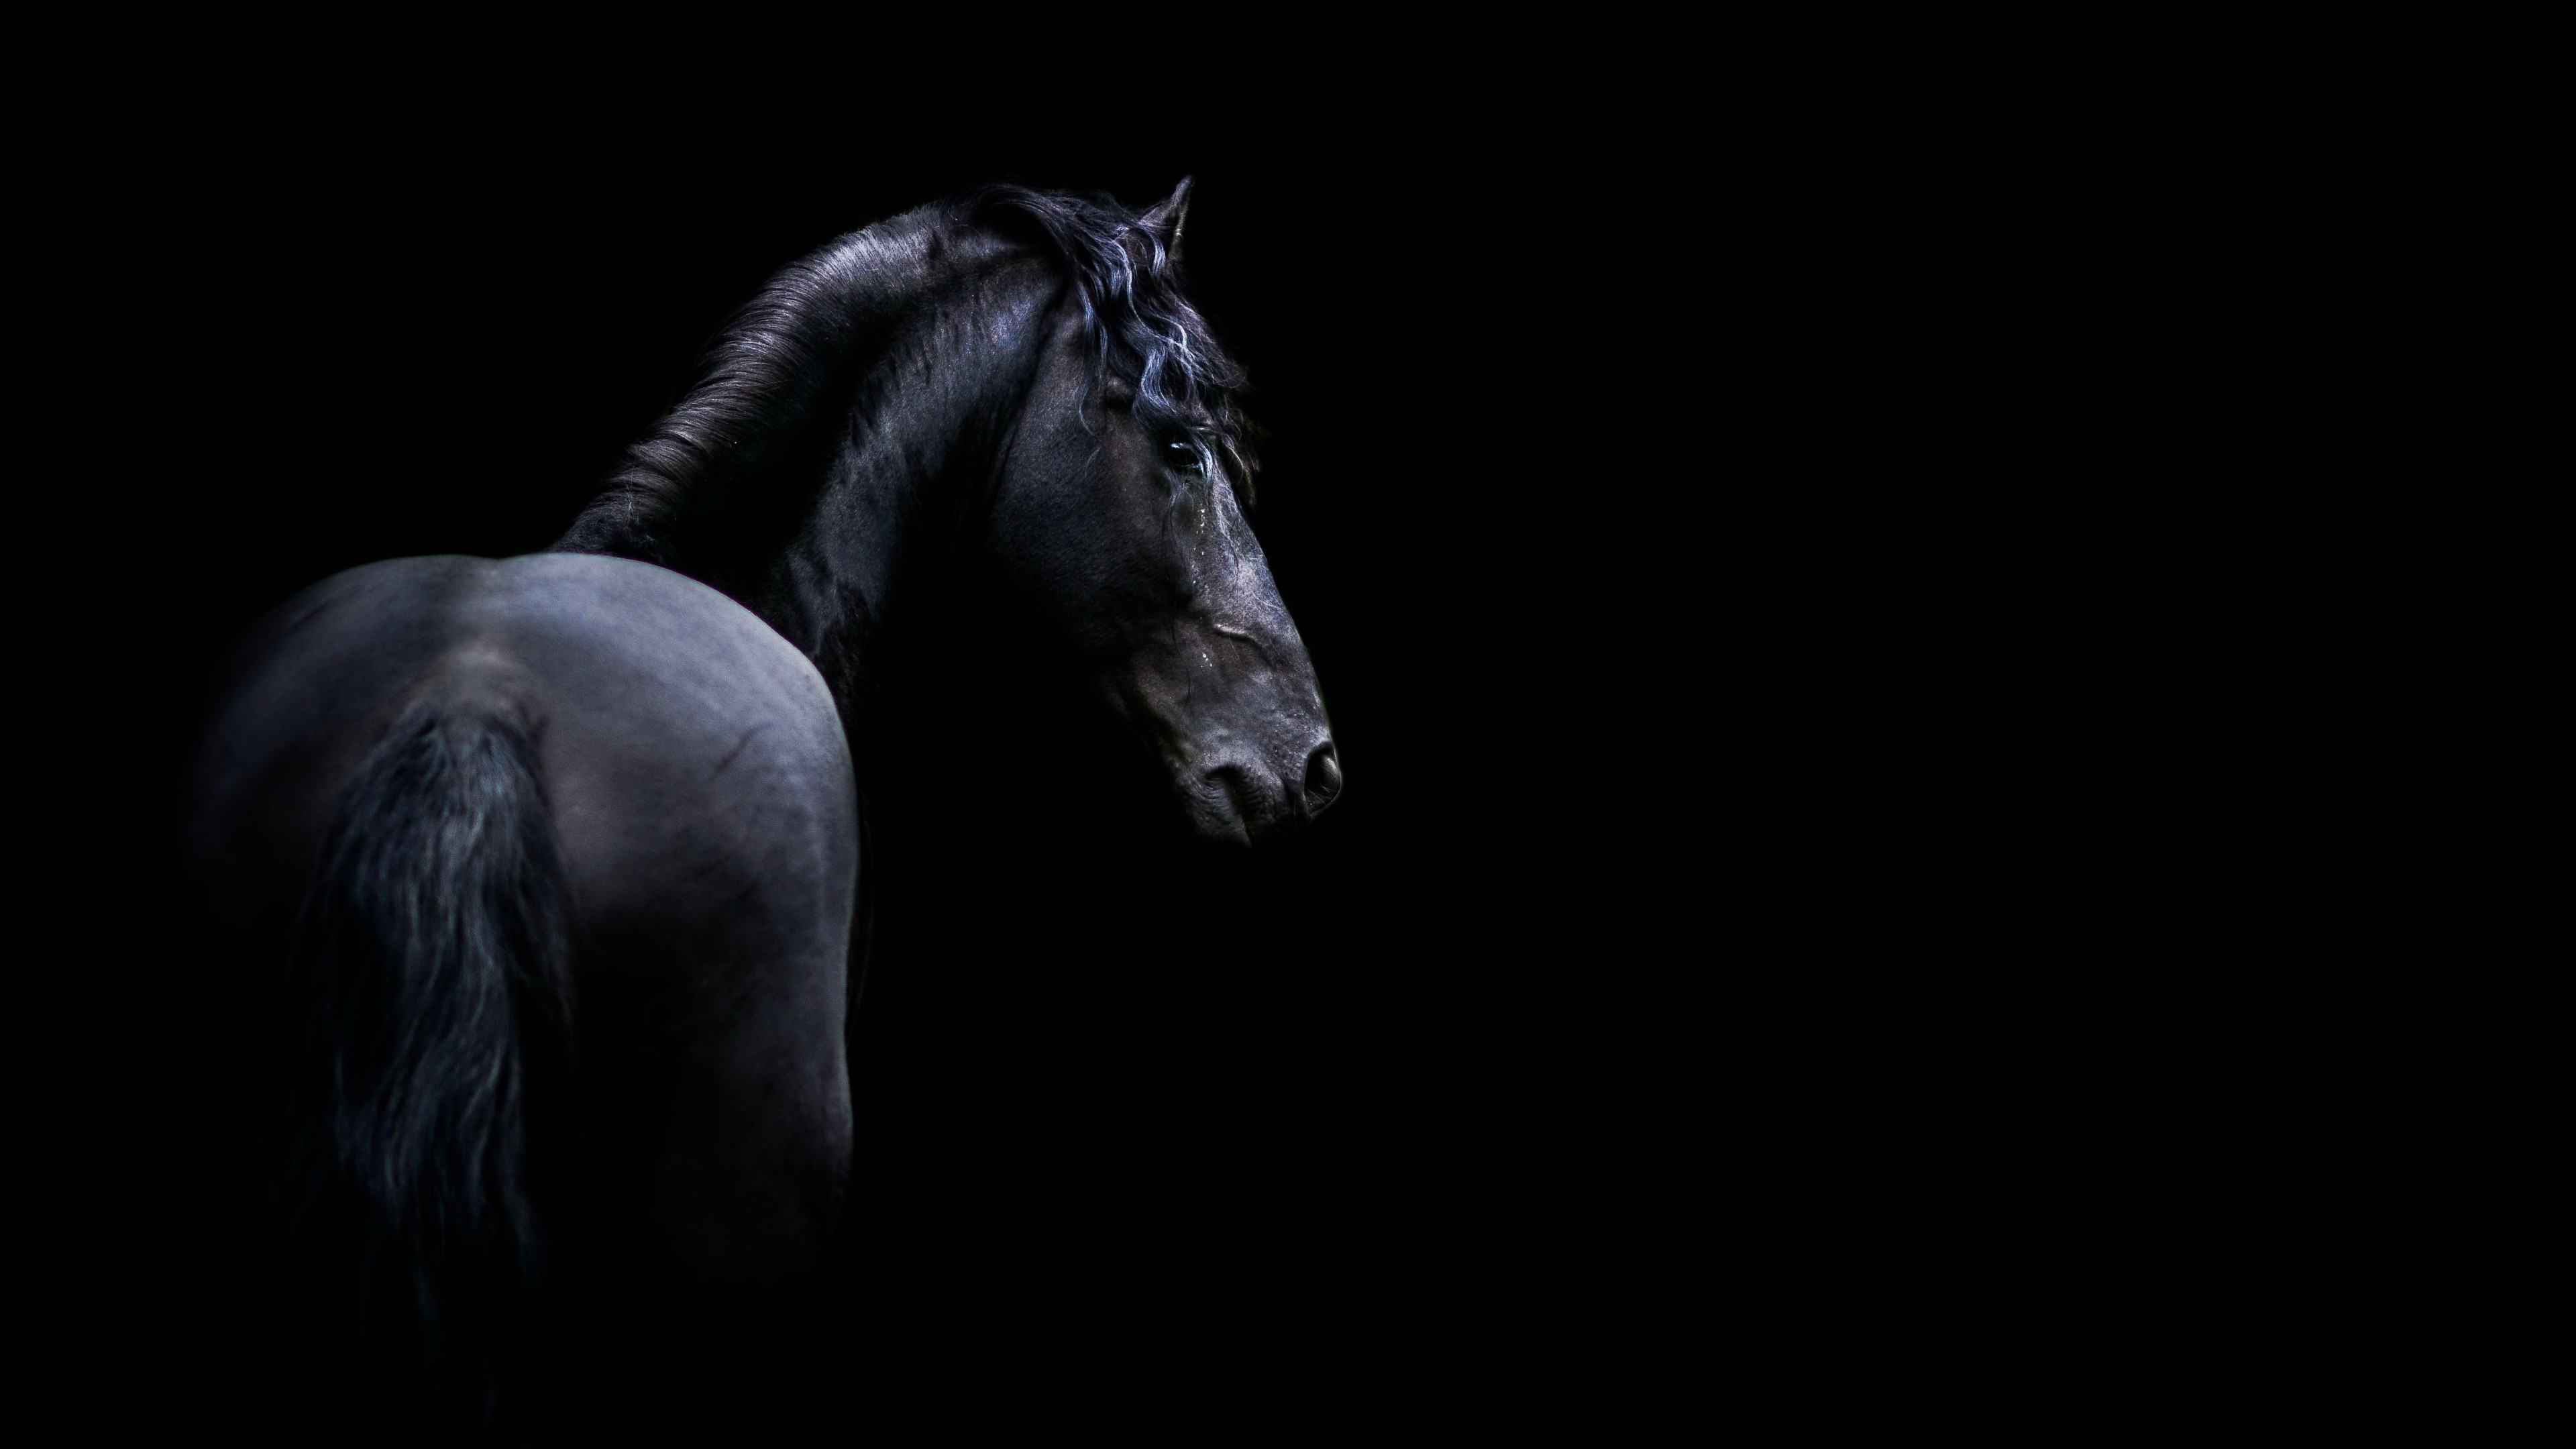 Black Horse Image Wallpaper Collection